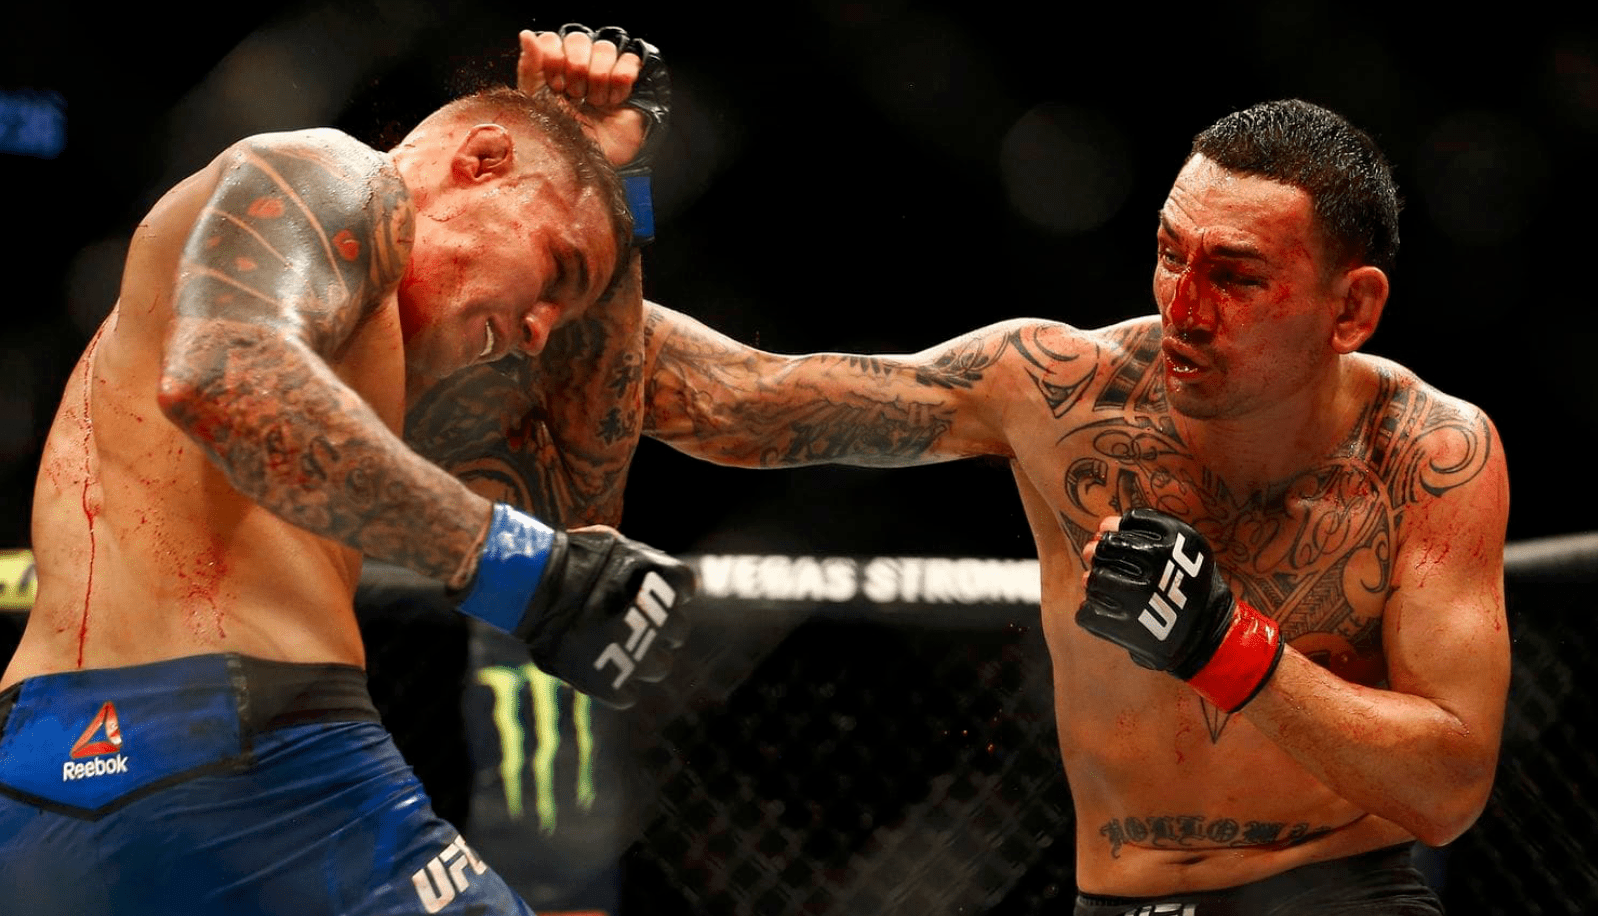 A Classy Max Holloway Posts Statement On Loss To Dustin Poirier